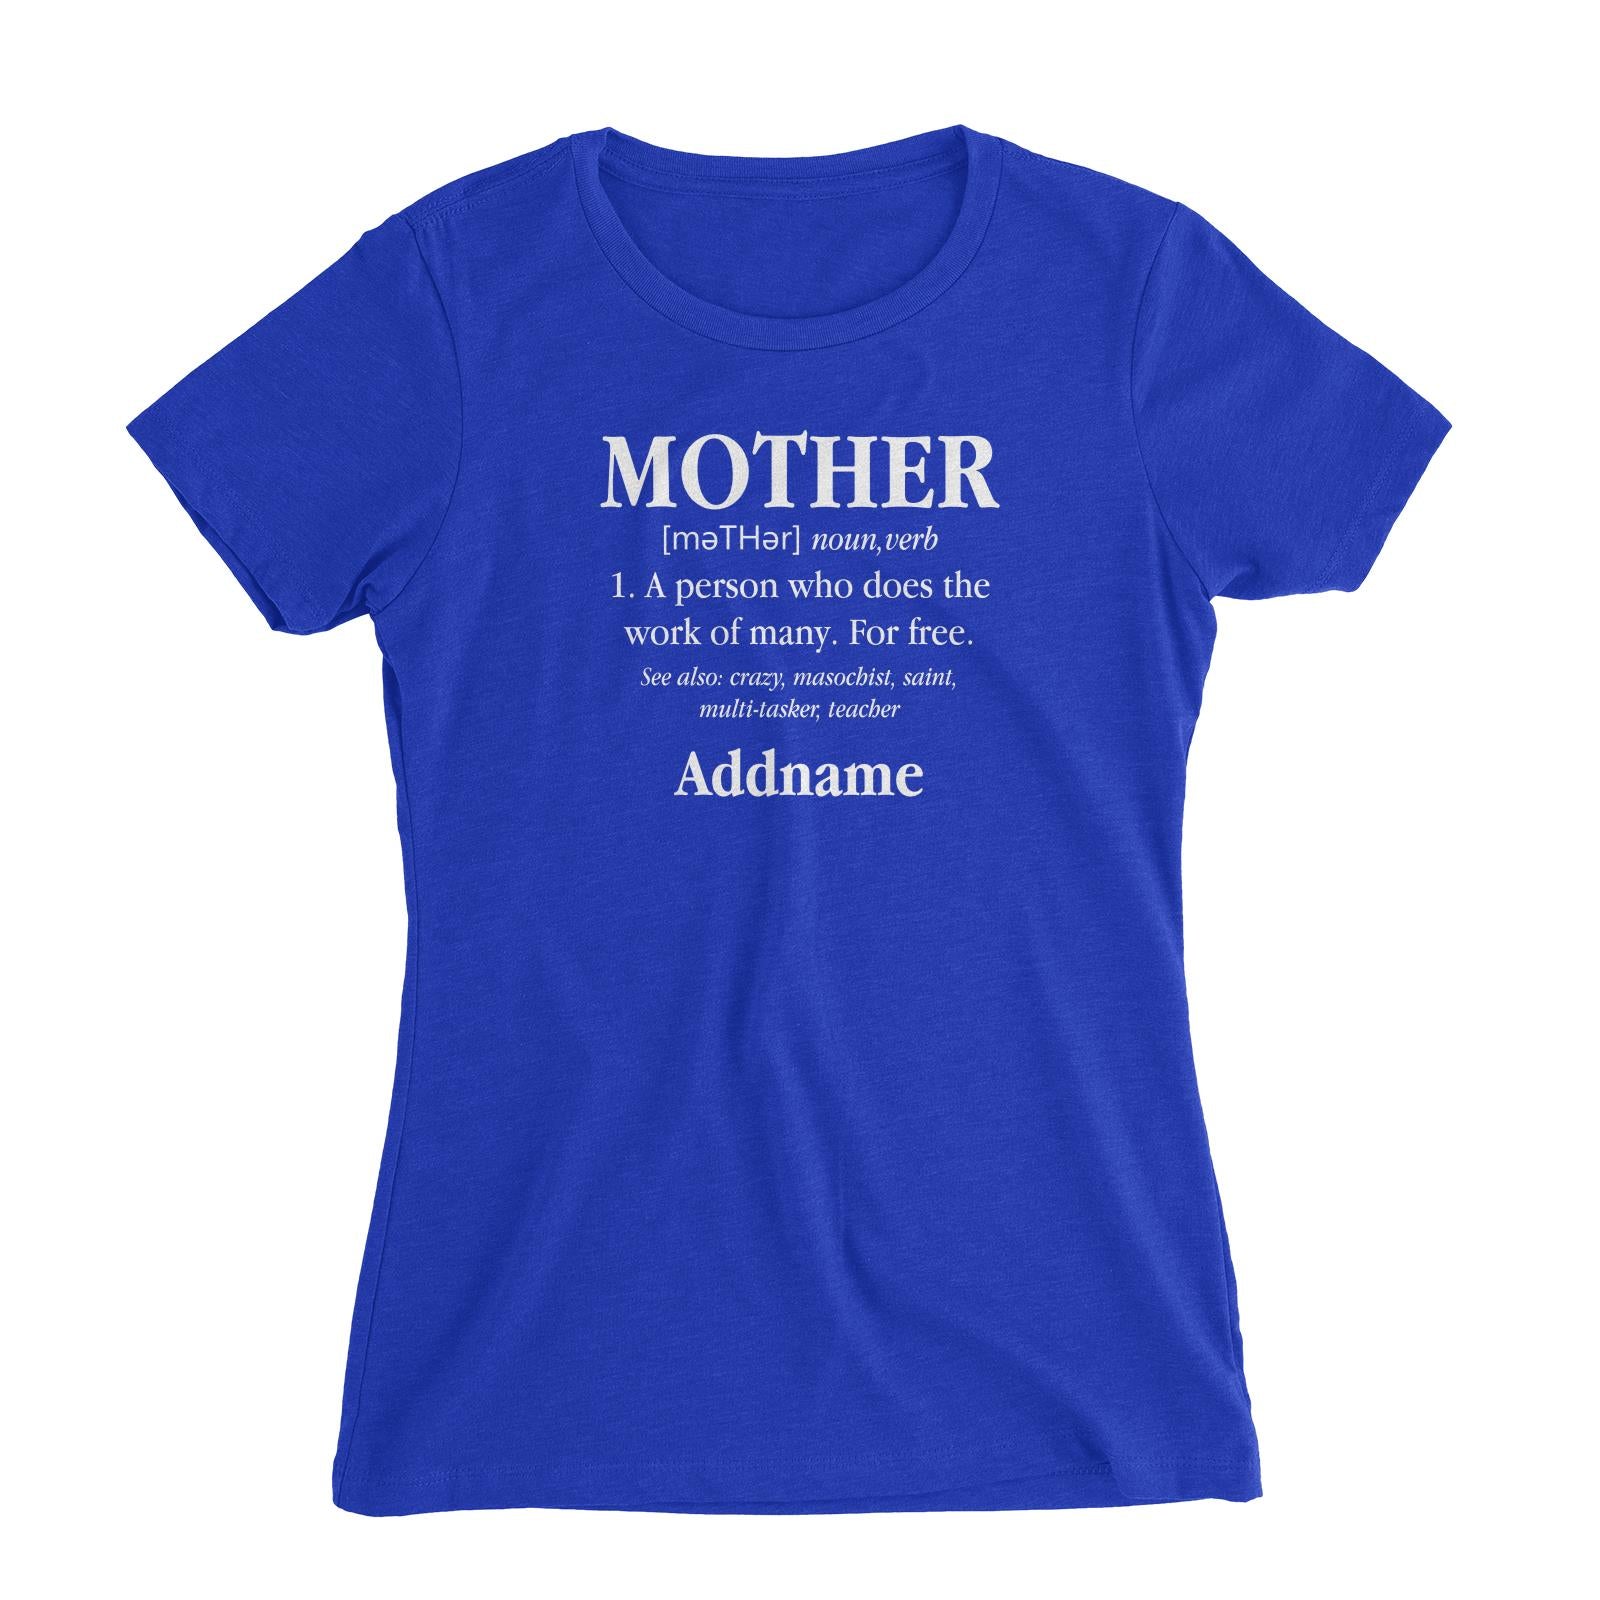 Funny Mom Quotes Mother Meaning A Person Who Does The Work Of Many For Free Addname Women's Slim Fit T-Shirt